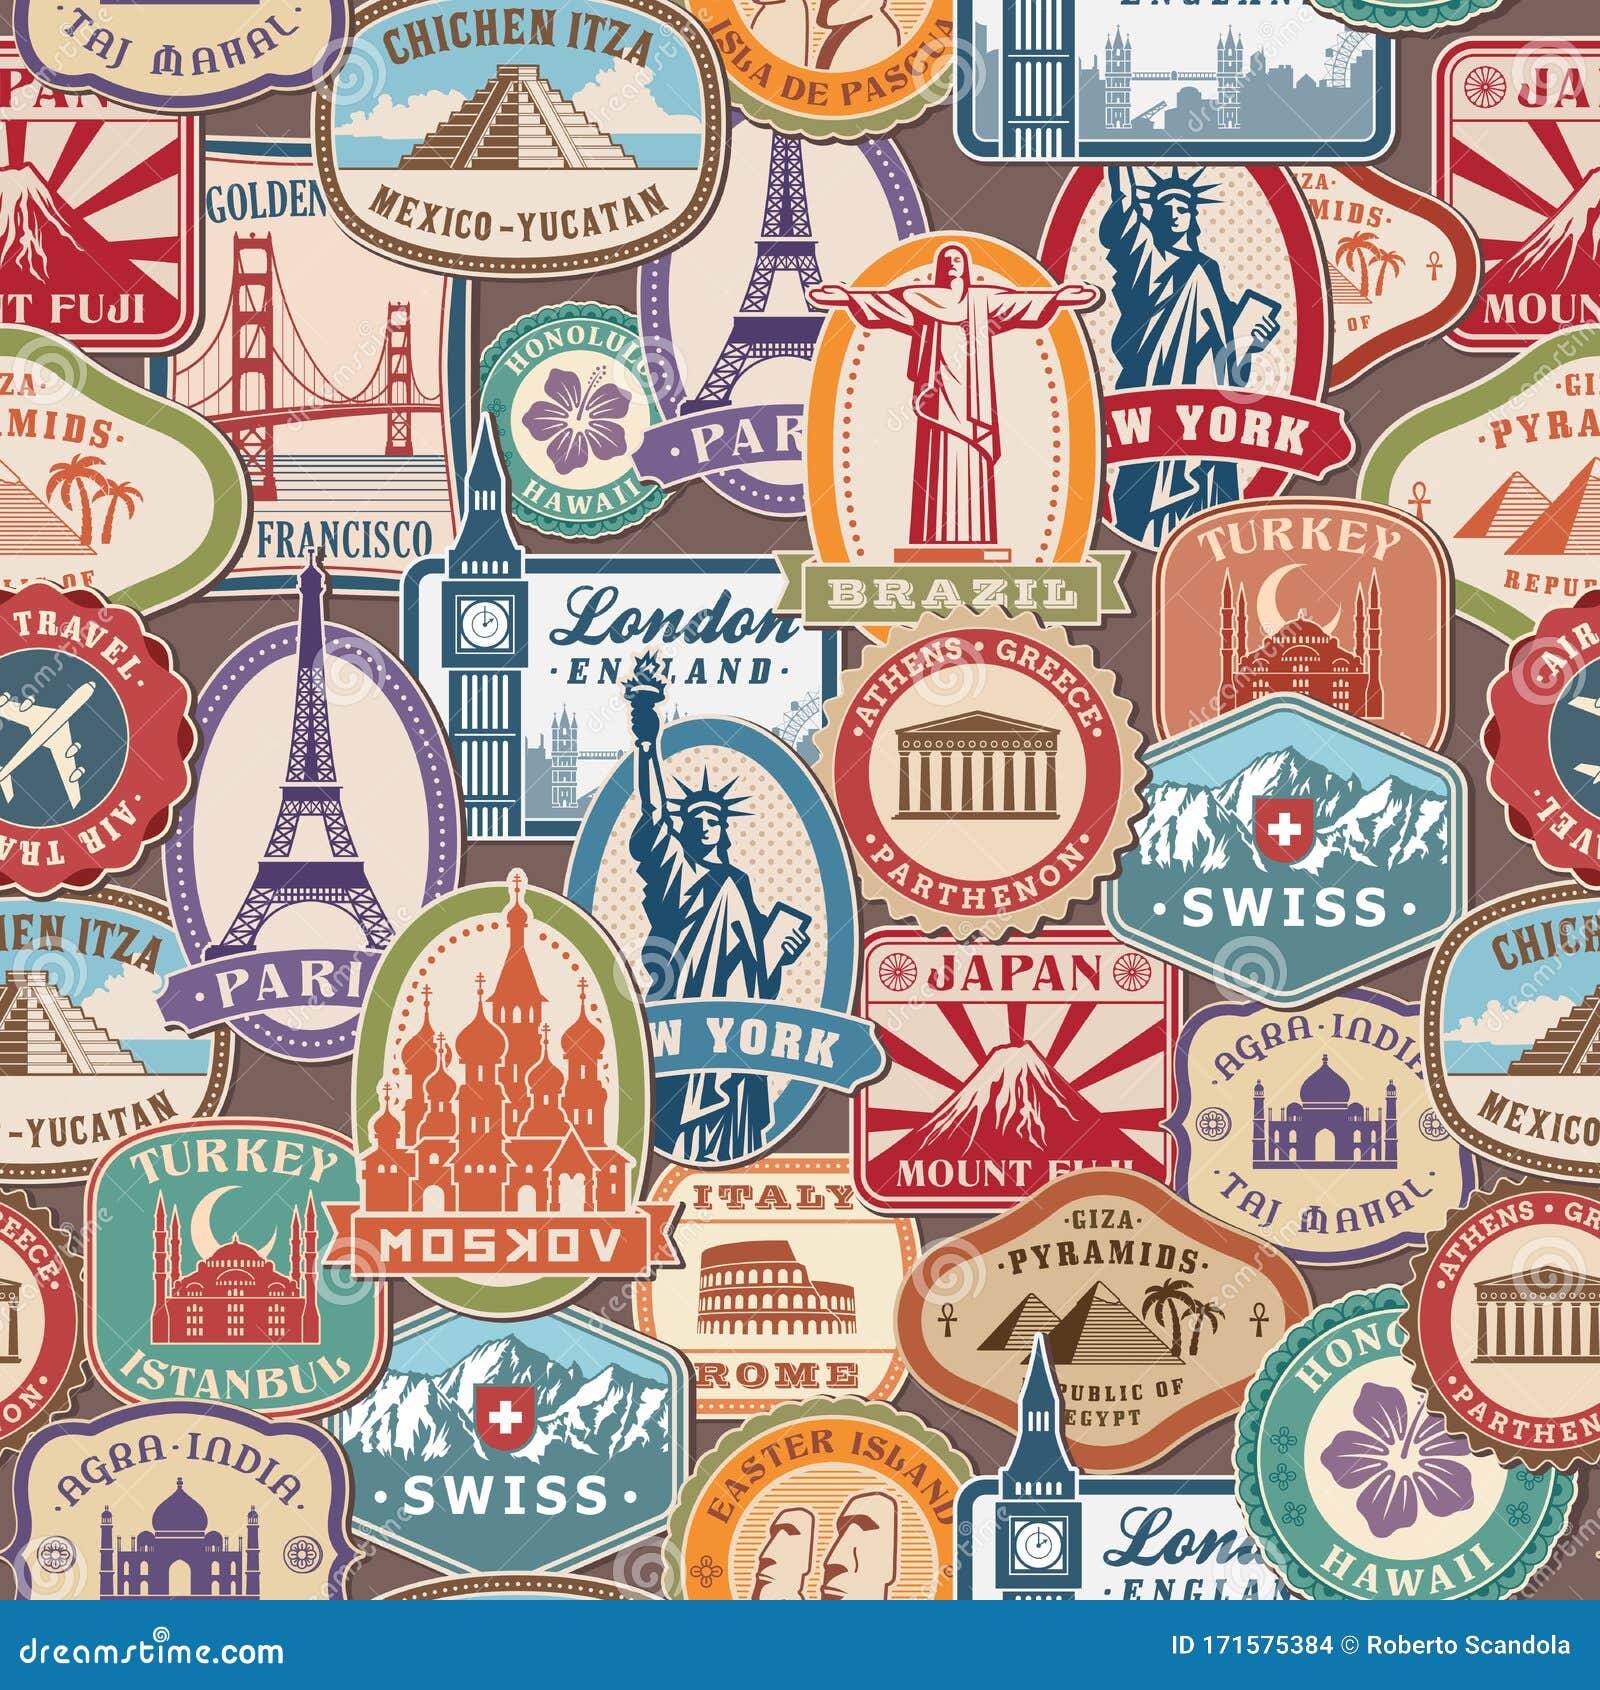 travel pattern. immigration stamps stickers with historical cultural objects